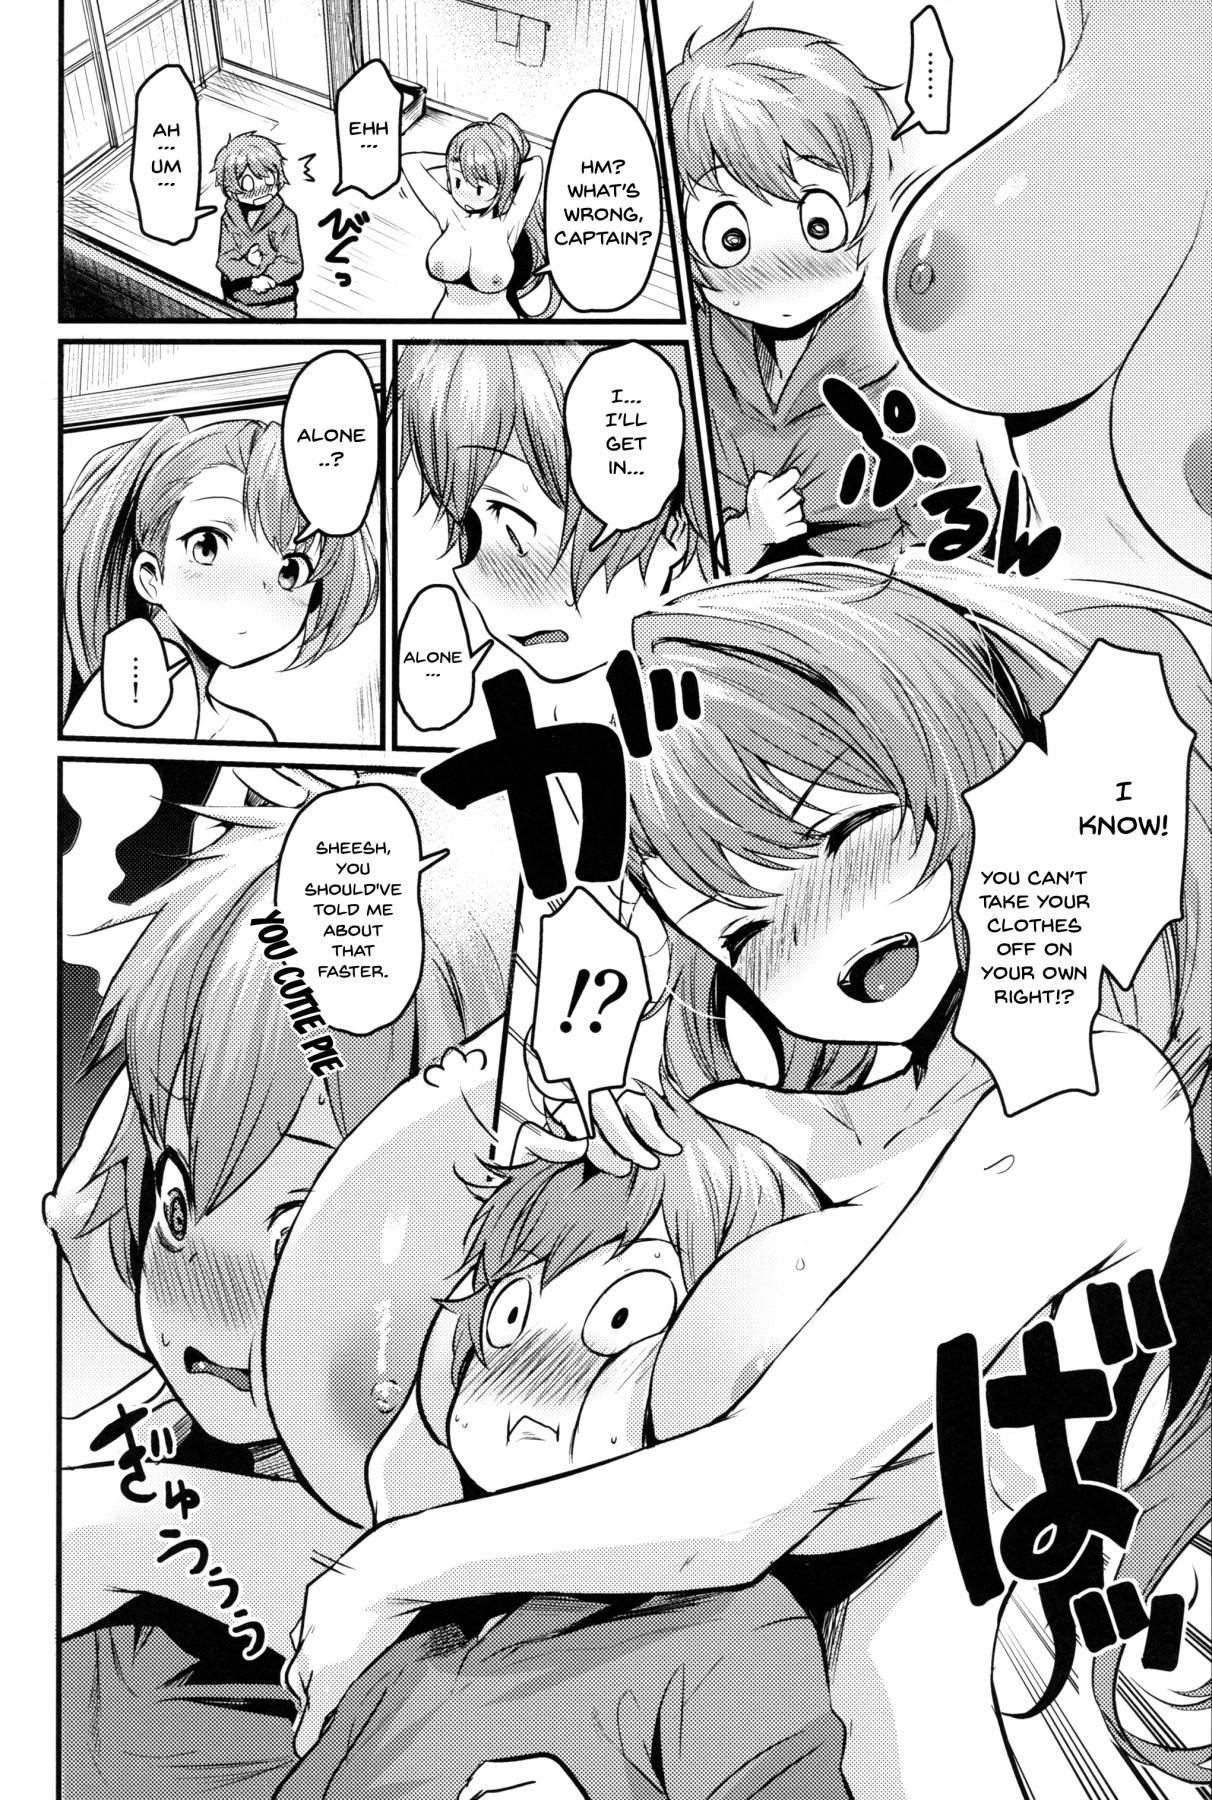 Stretching Be to Ze | Be & Ze - Granblue fantasy Hentai - Page 3